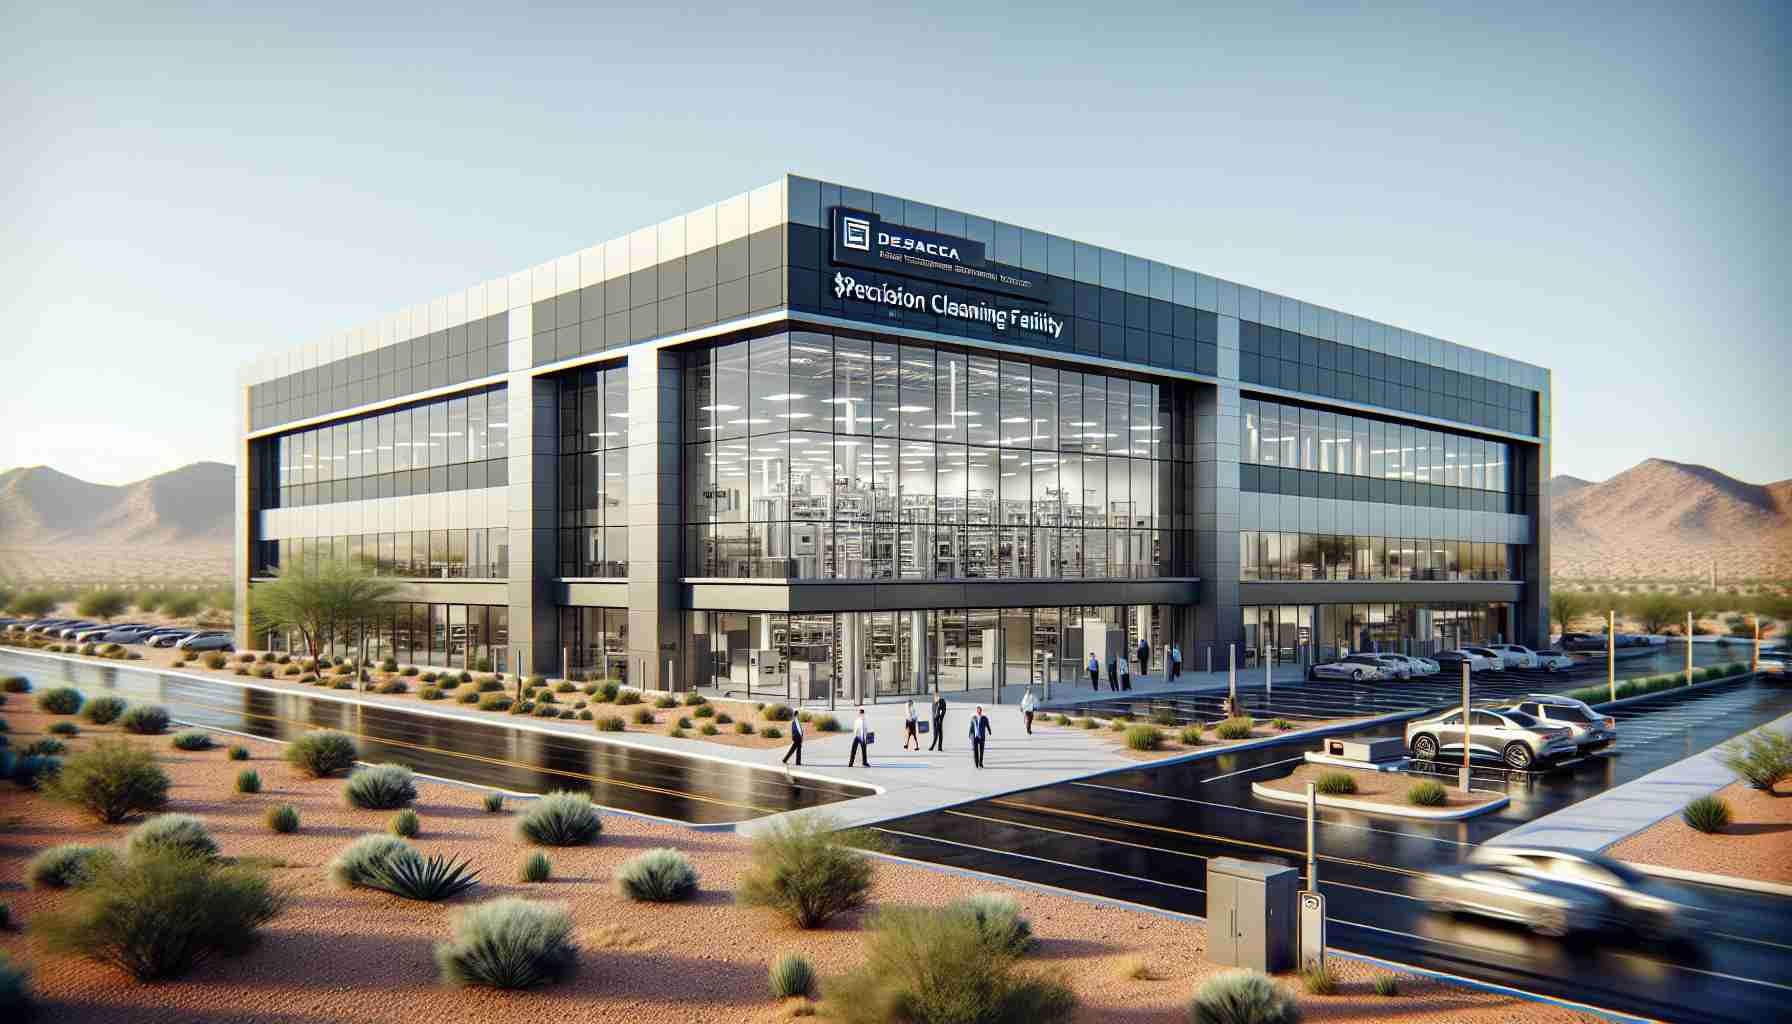 Pentagon Technologies Group Inc. Announces $50 Million Precision Cleaning Facility in Mesa